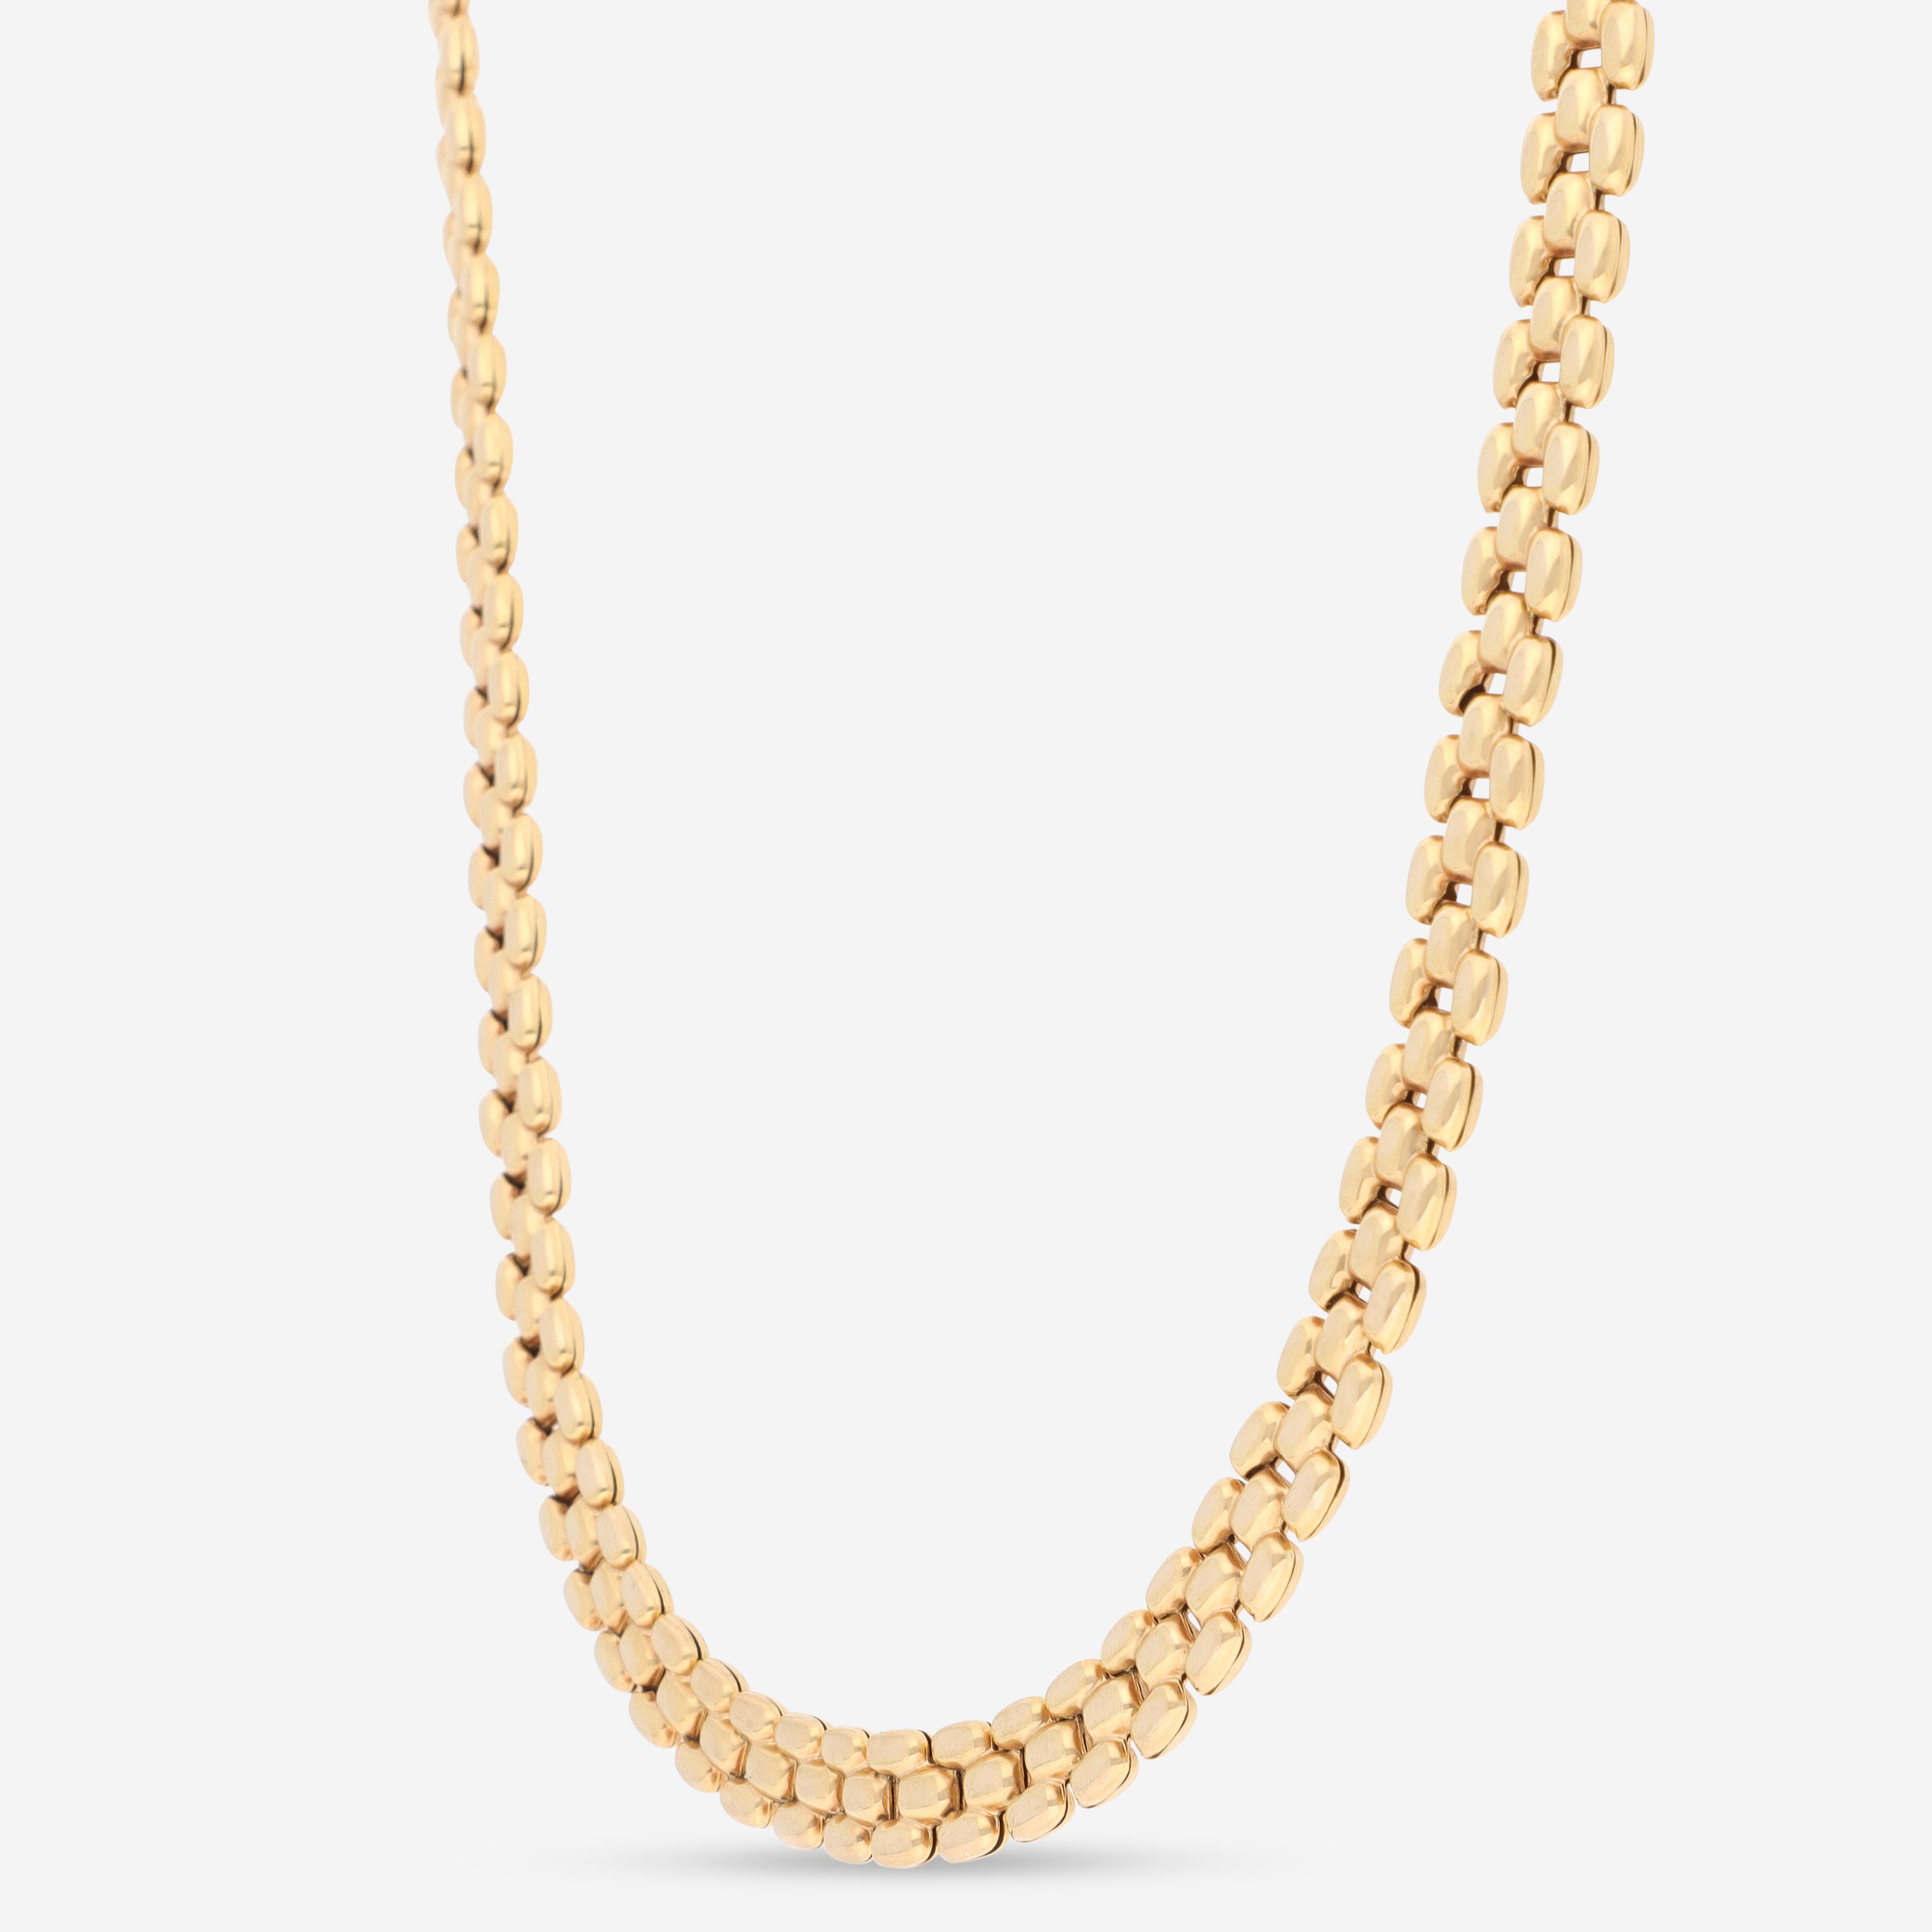 Ina Mar 14K Yellow Gold Polished Panther Necklace SGN12621K4Y